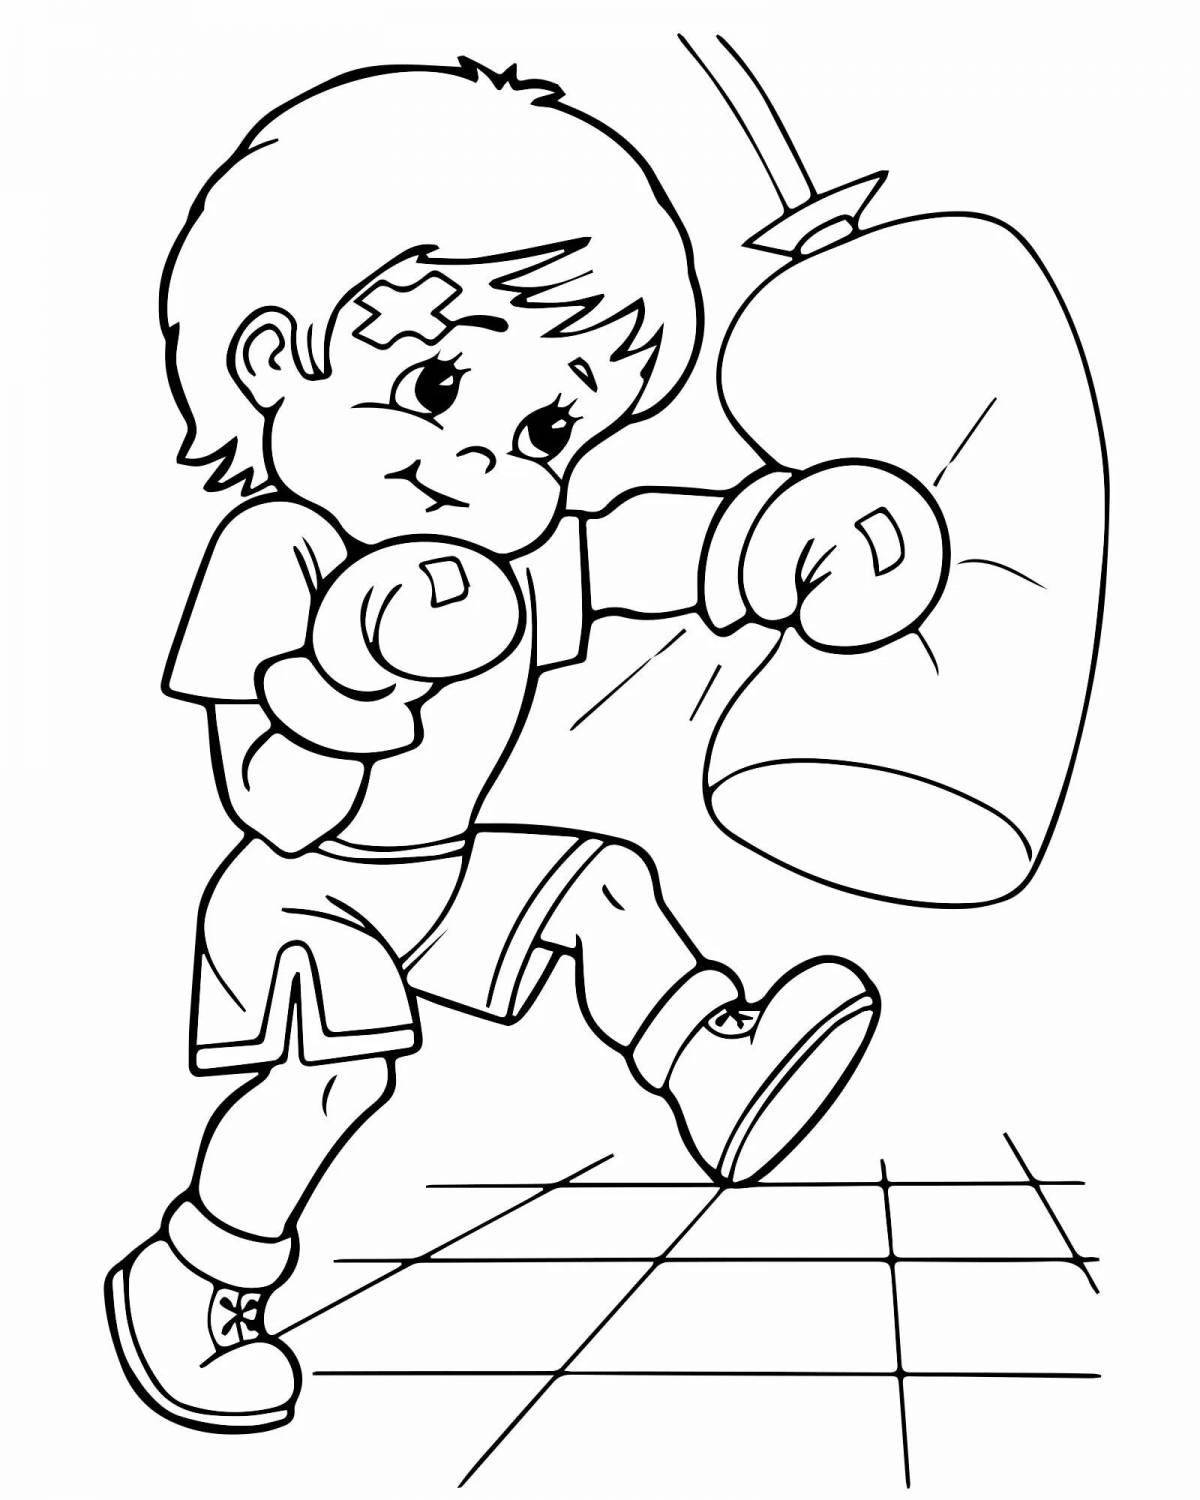 Friendly boxing coloring book for kids